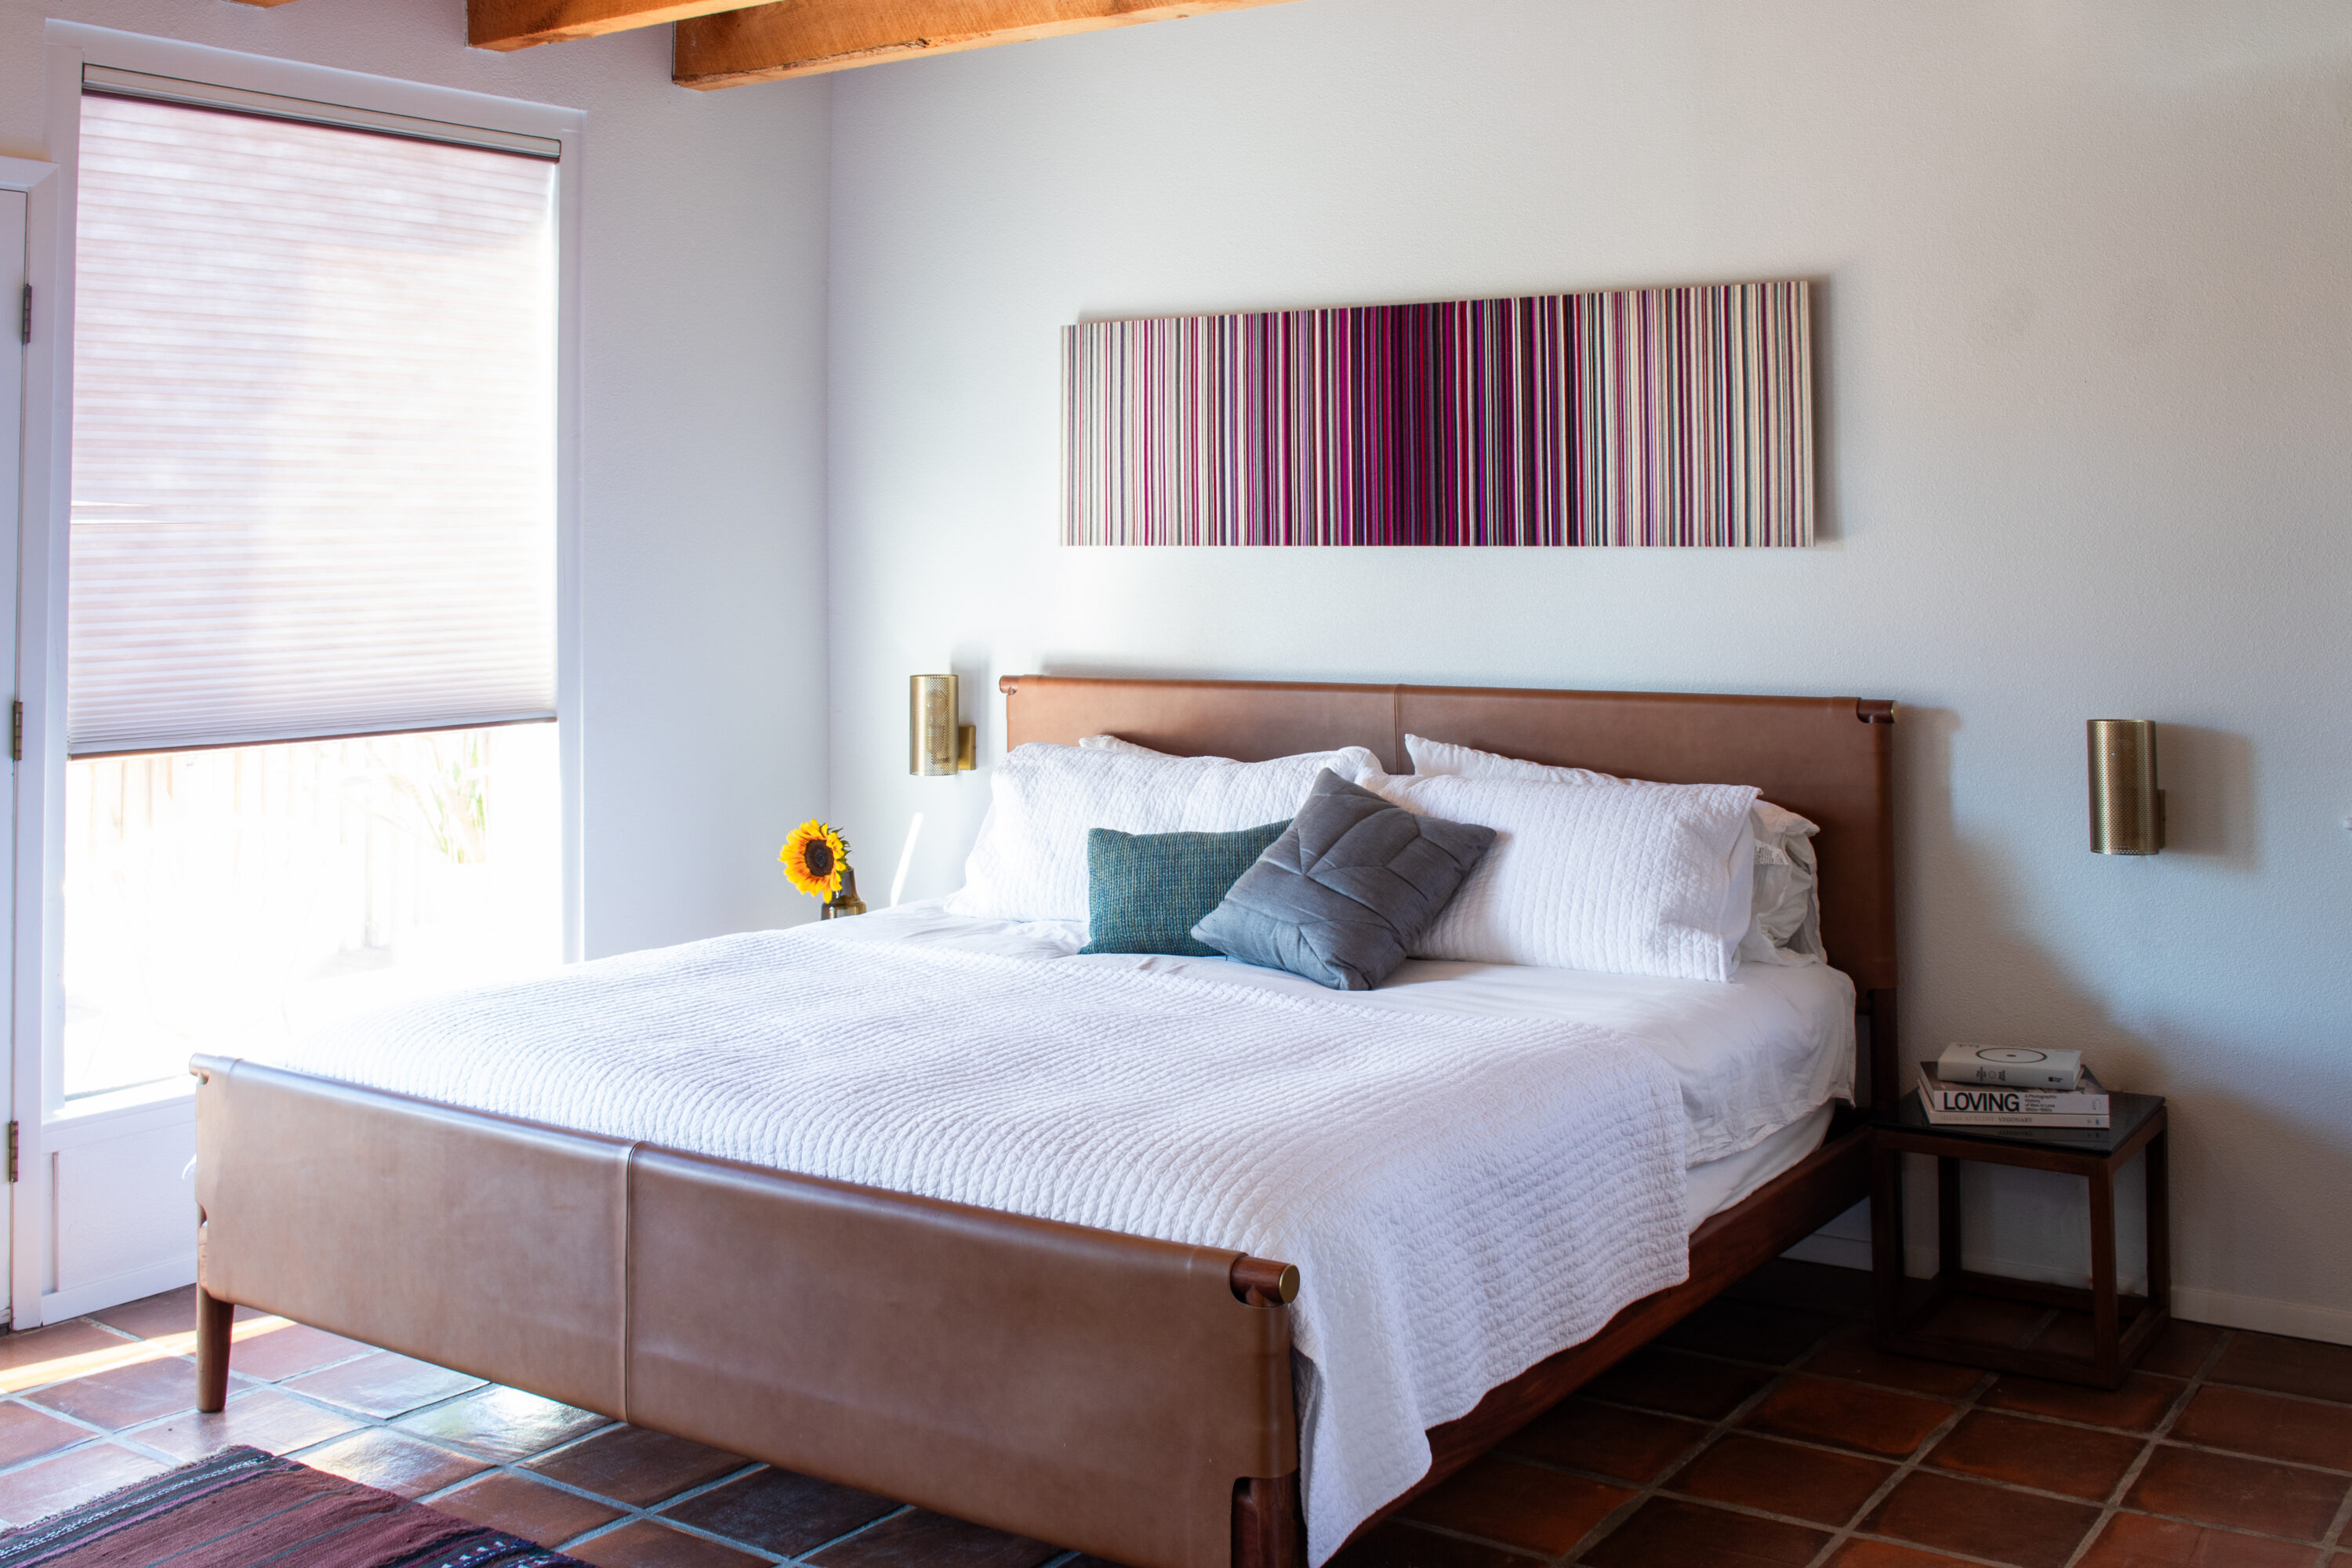 a long rectangular felt panel with vertical strips of gradient color hangs above a bed with a blue blanket and two side tables.